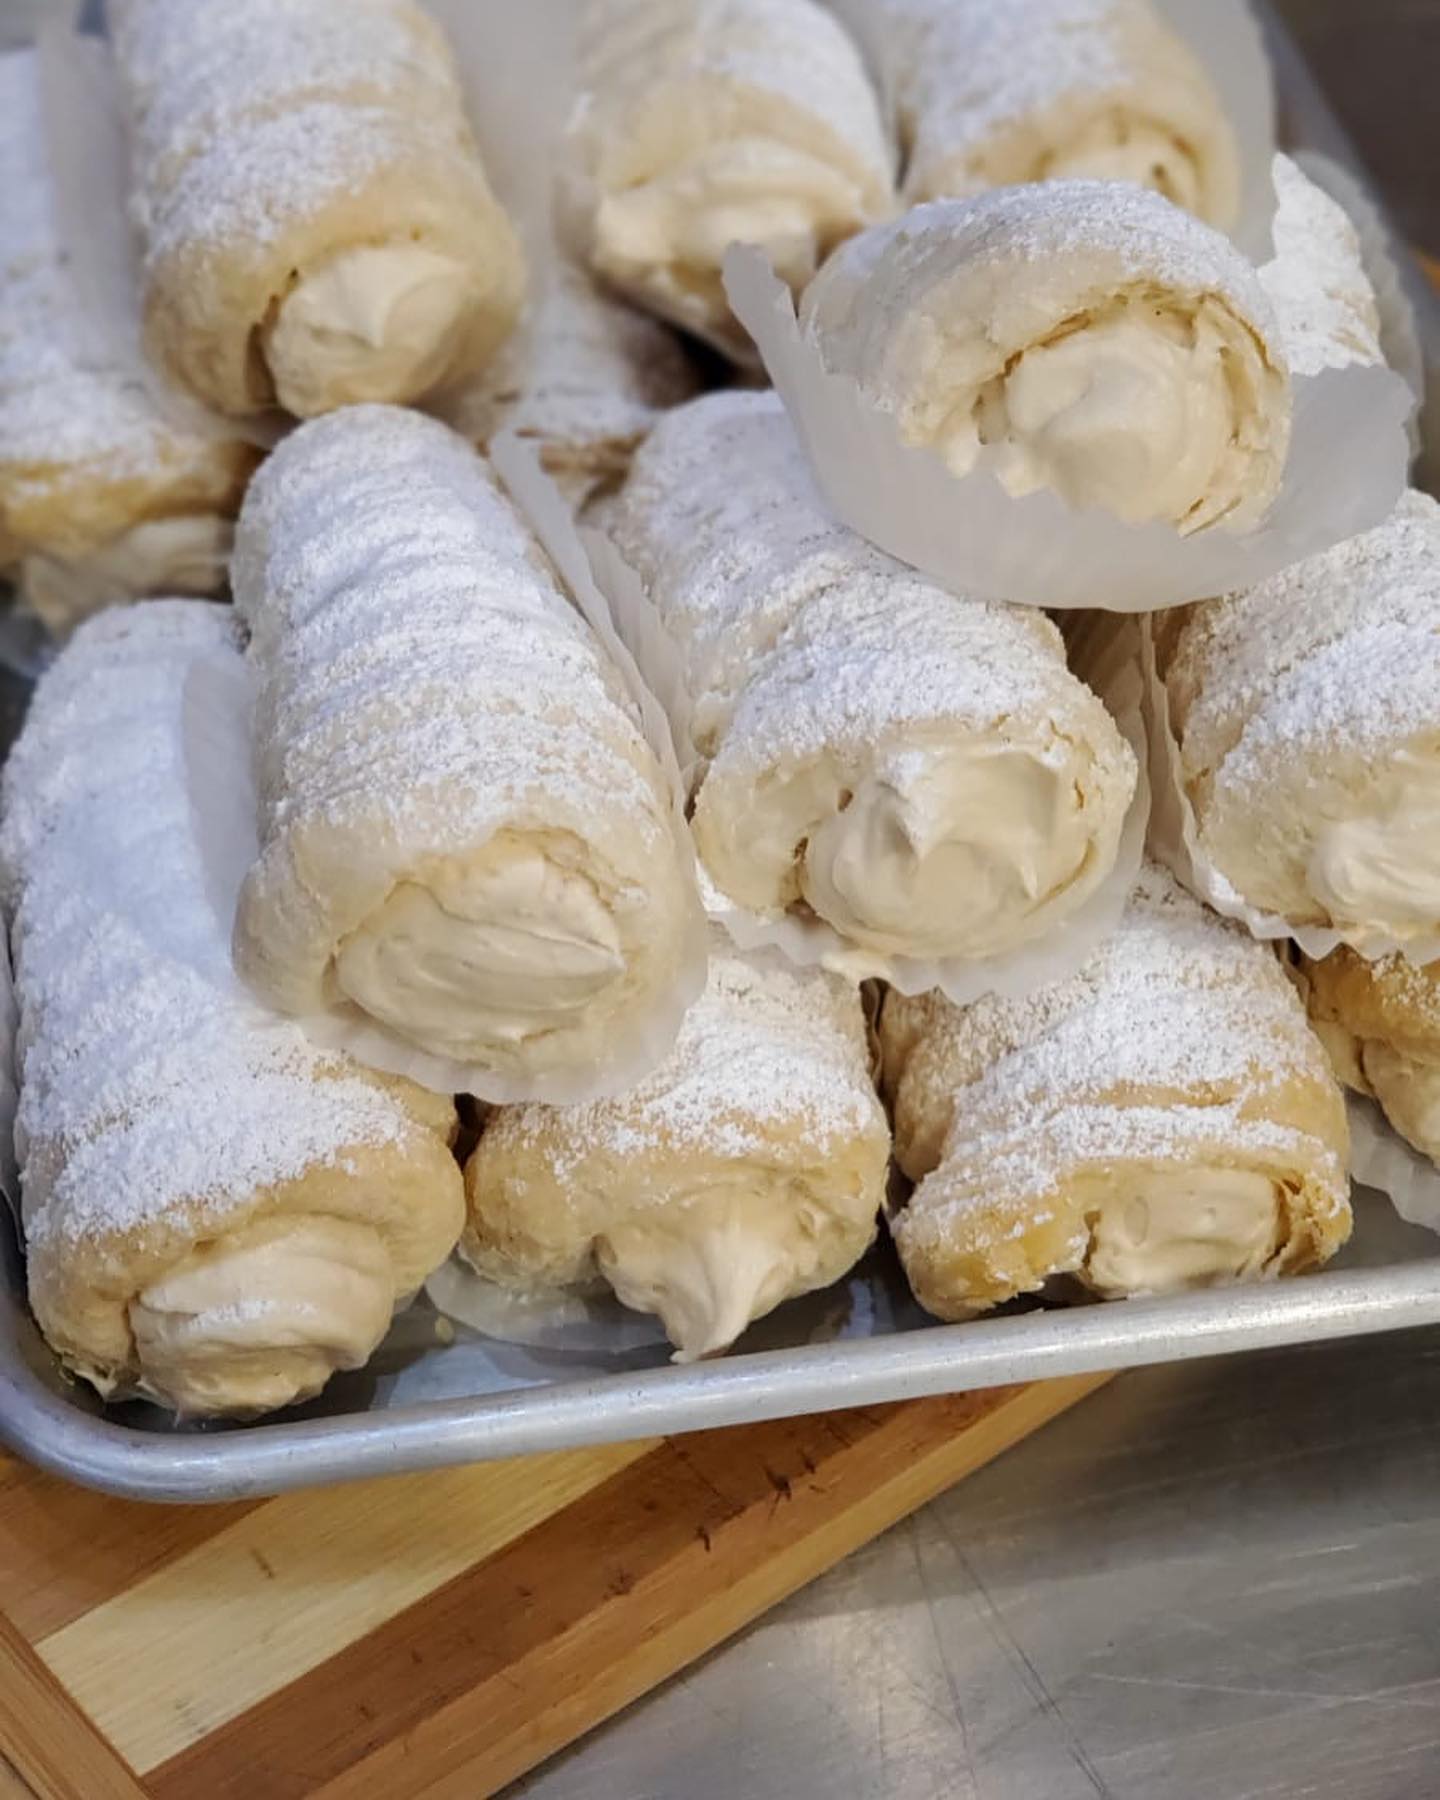 A tray of freshly made cannoli dusted with powdered sugar, displayed with creamy fillings visible at each end. the pastry shells have a golden-brown color and flaky texture.